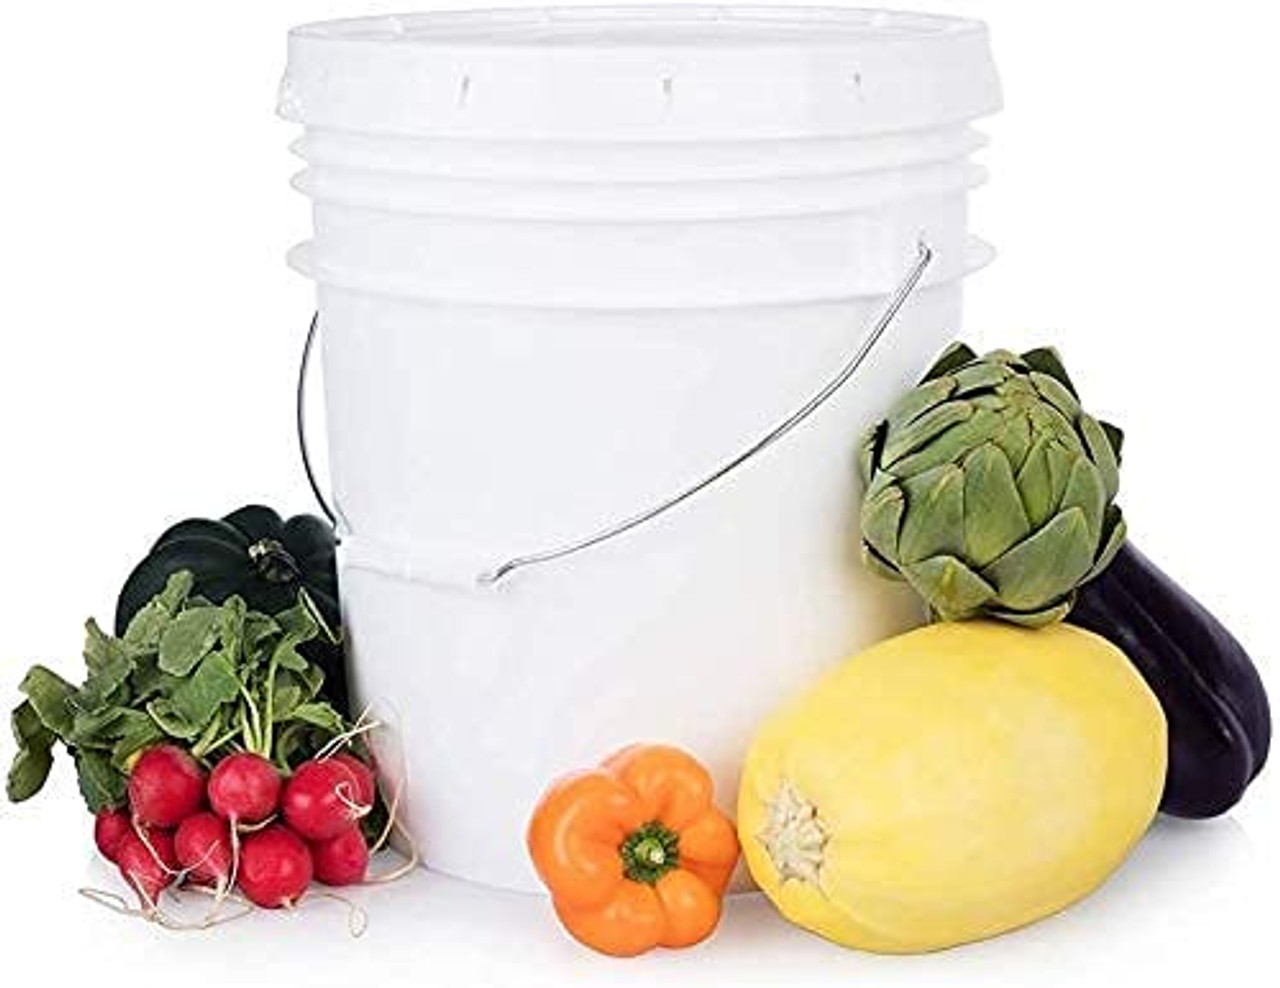 3.5 Gallon Bucket & Lid - Durable 90 Mil All Purpose Pail - Made in The USA - Food Grade - Contains No BPA Plastic - Recyclable (1, Black)